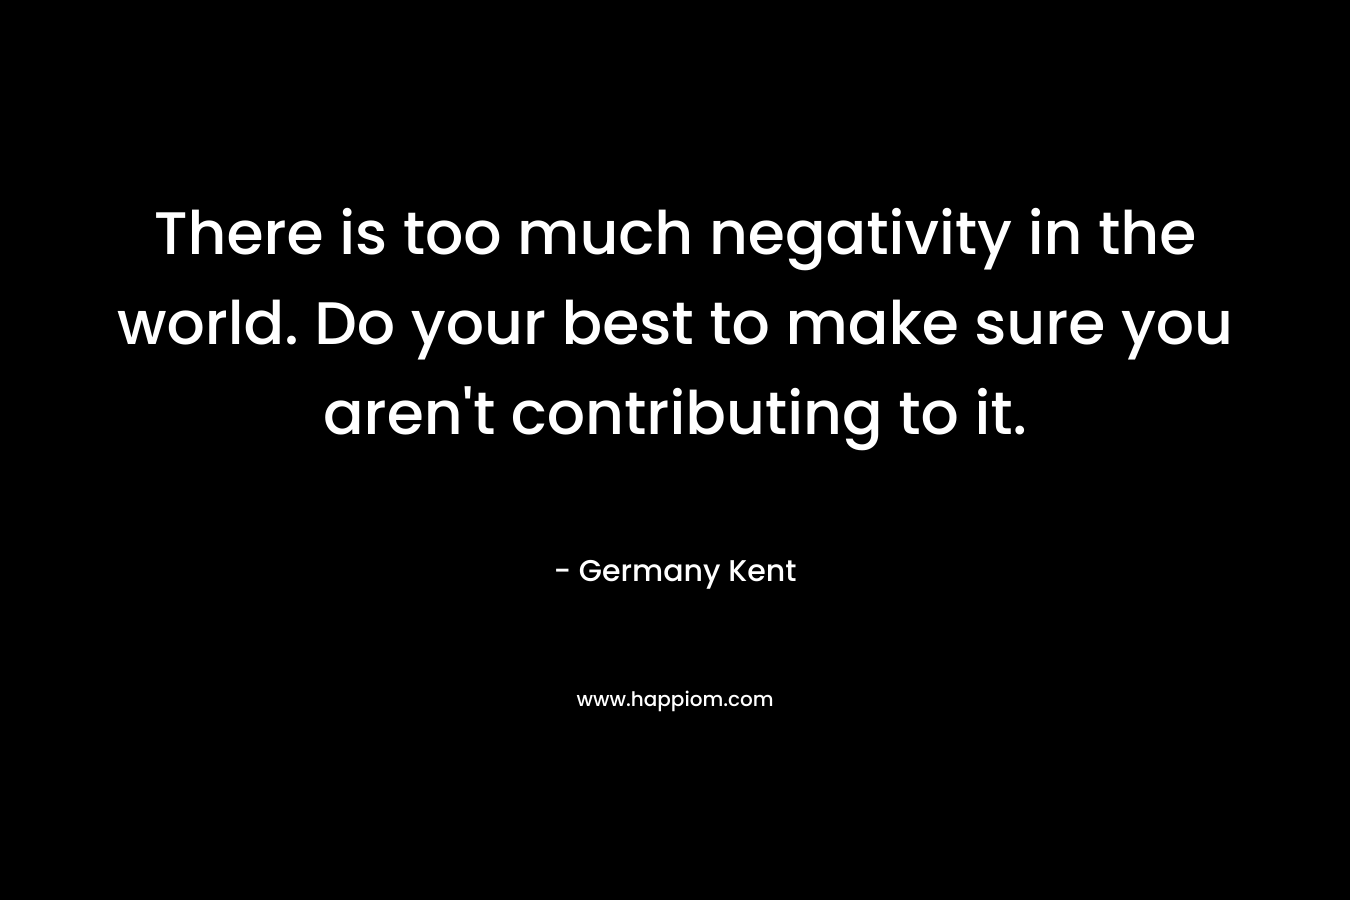 There is too much negativity in the world. Do your best to make sure you aren't contributing to it.